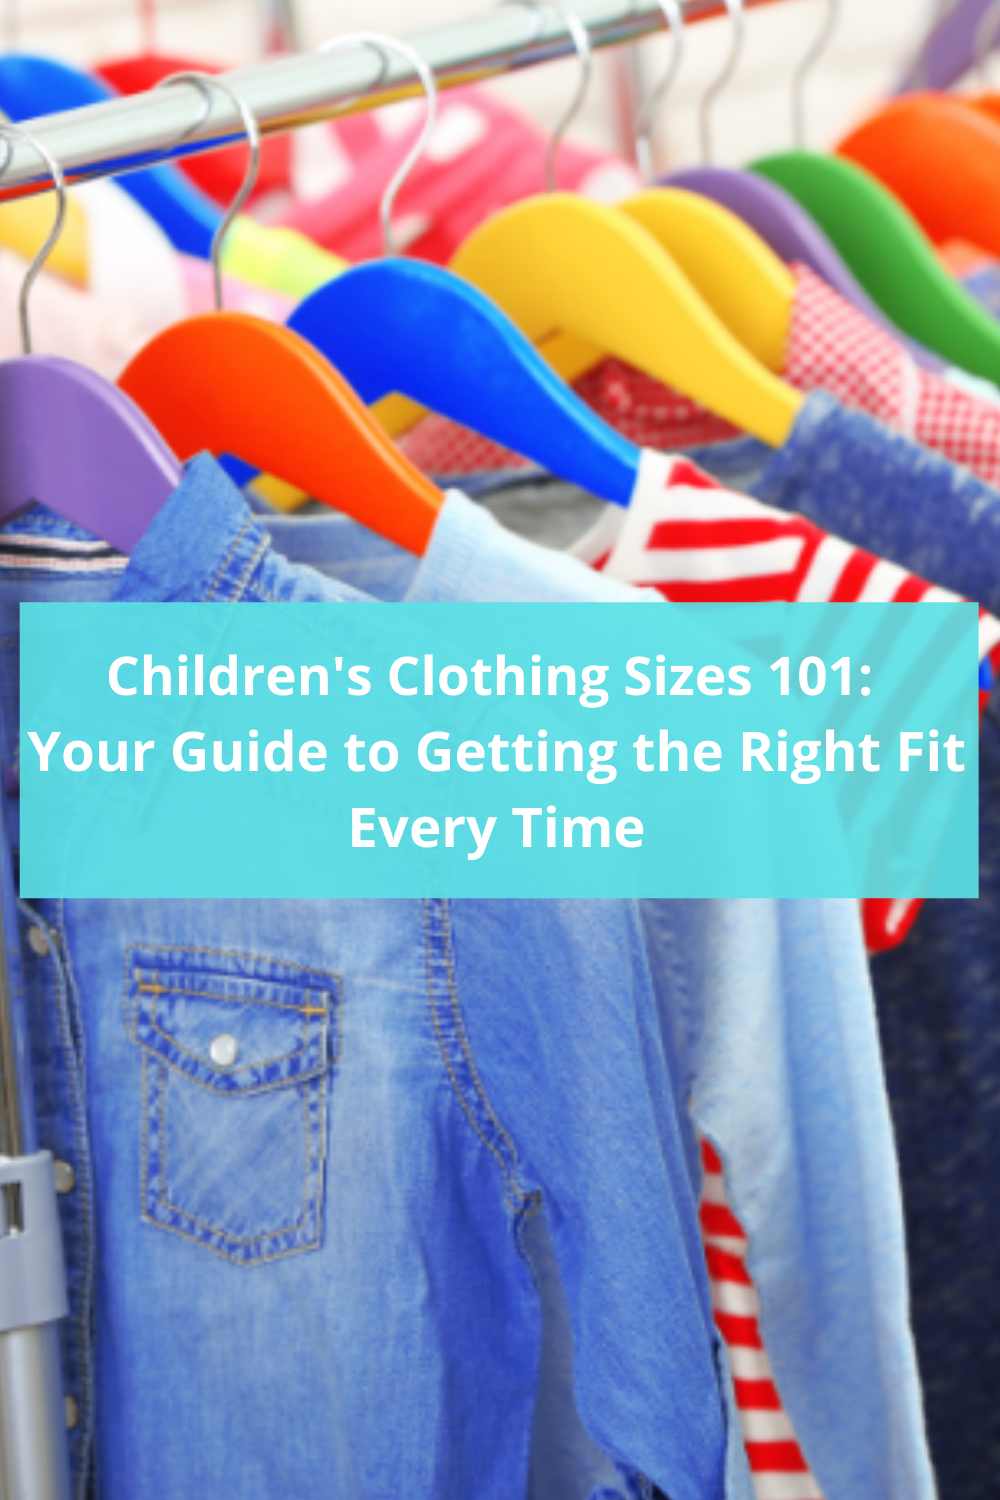 Children's Clothing Sizes 101: Your Guide to Getting the Right Fit